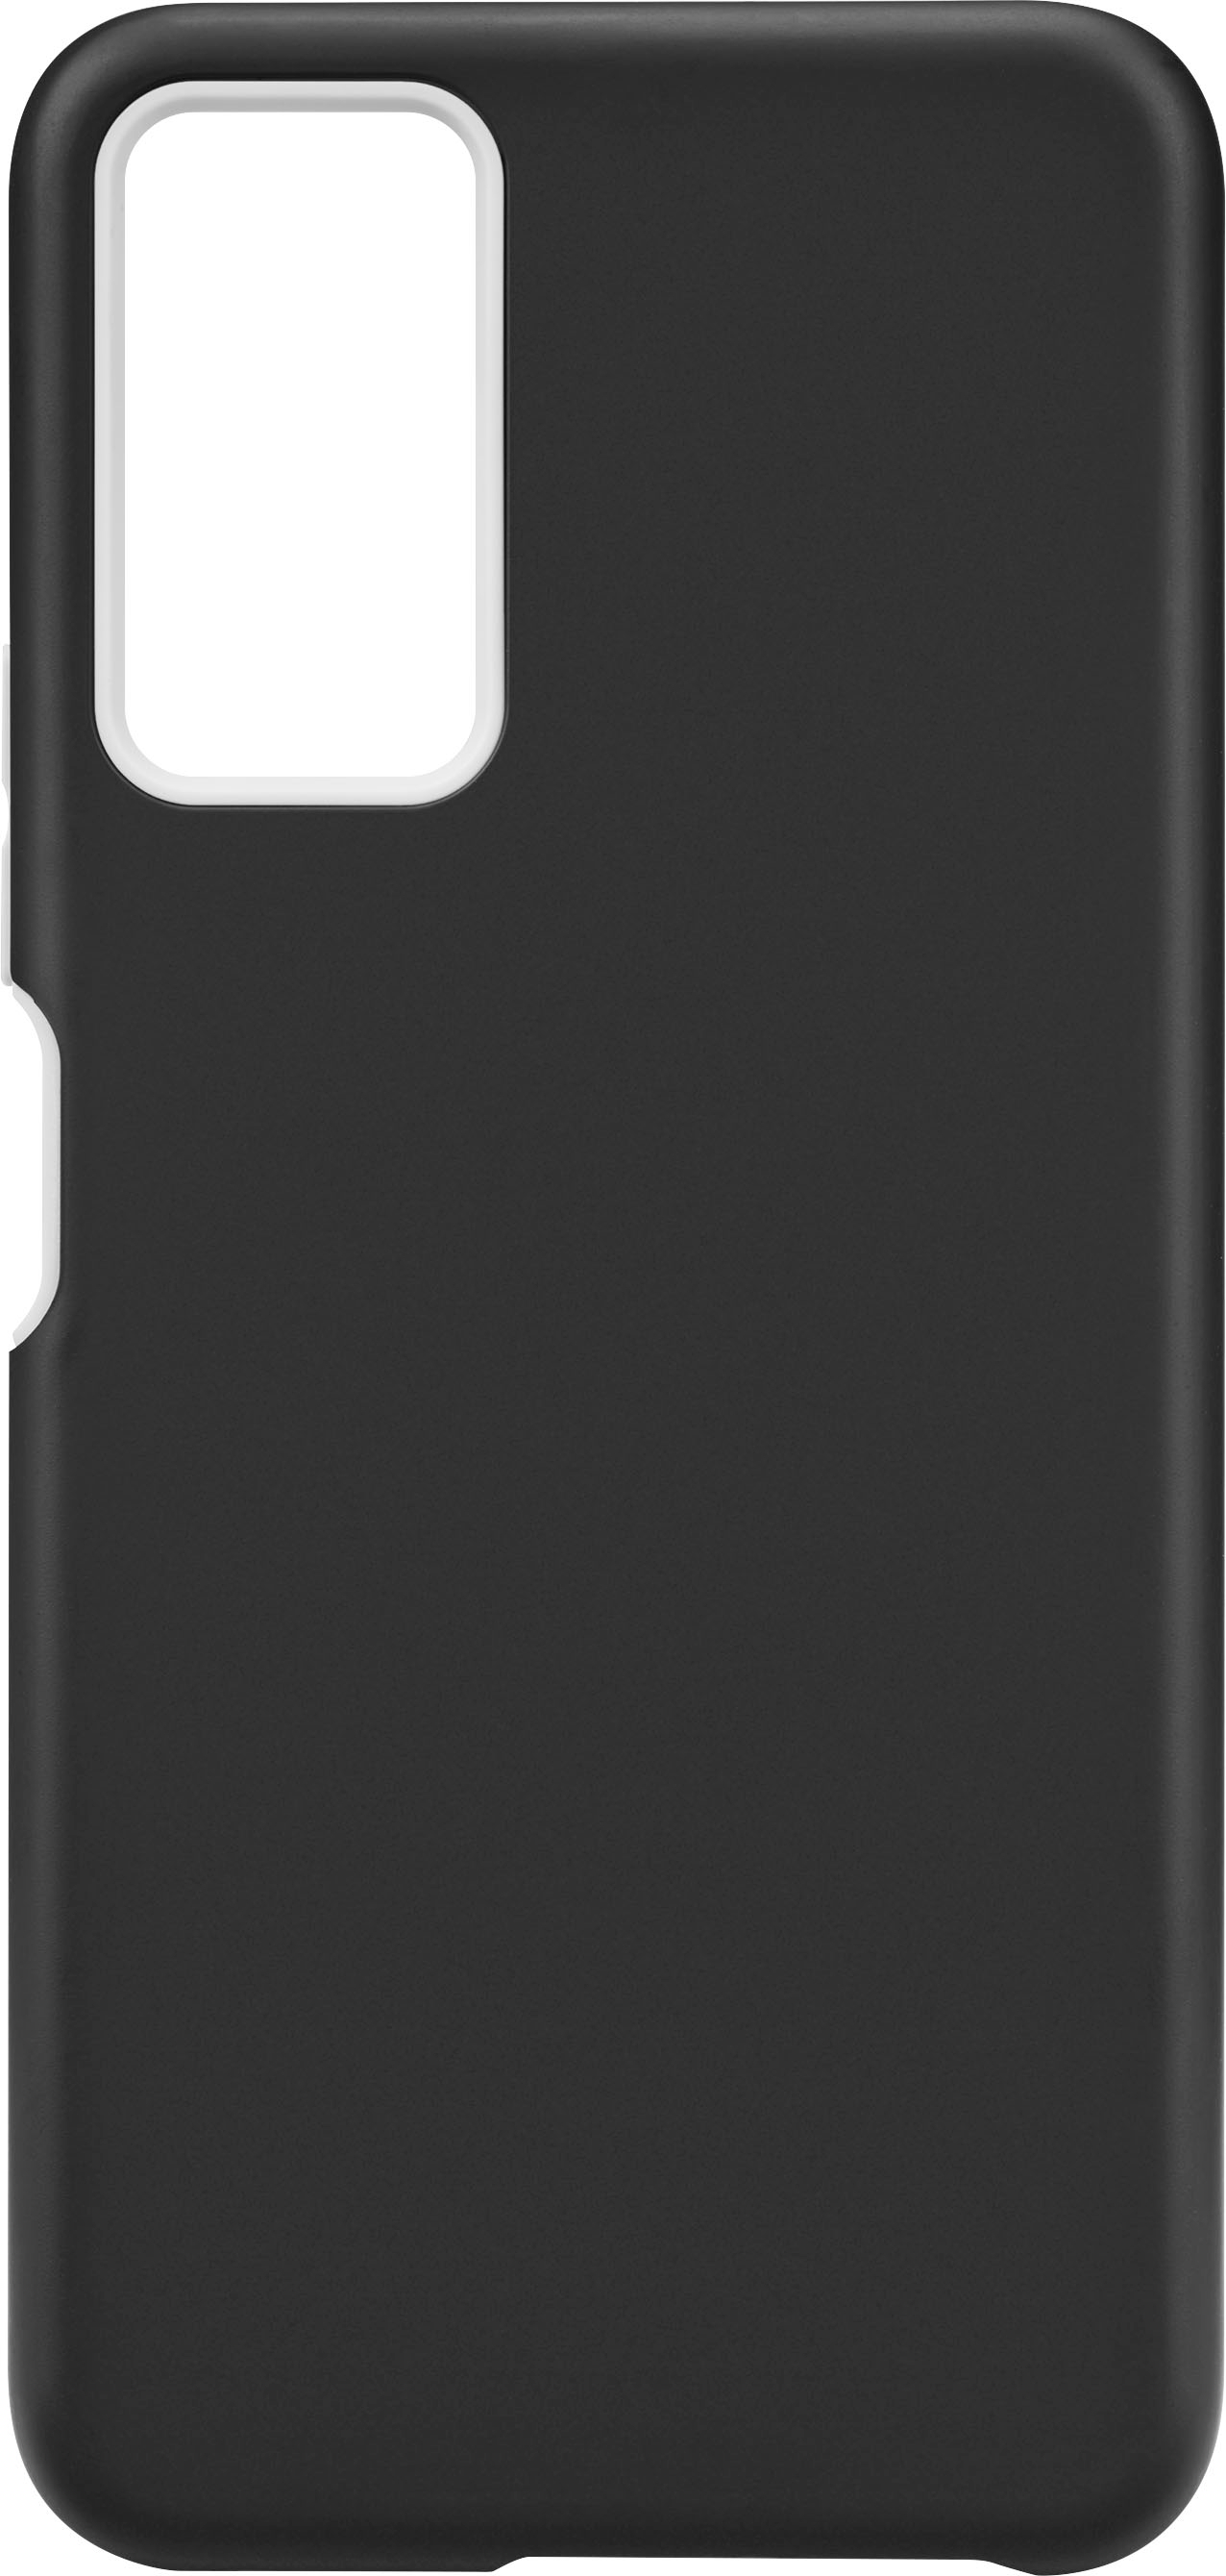 Lively - Dual-Layer Hard Shell Case for Jitterbug Smart4 - Black